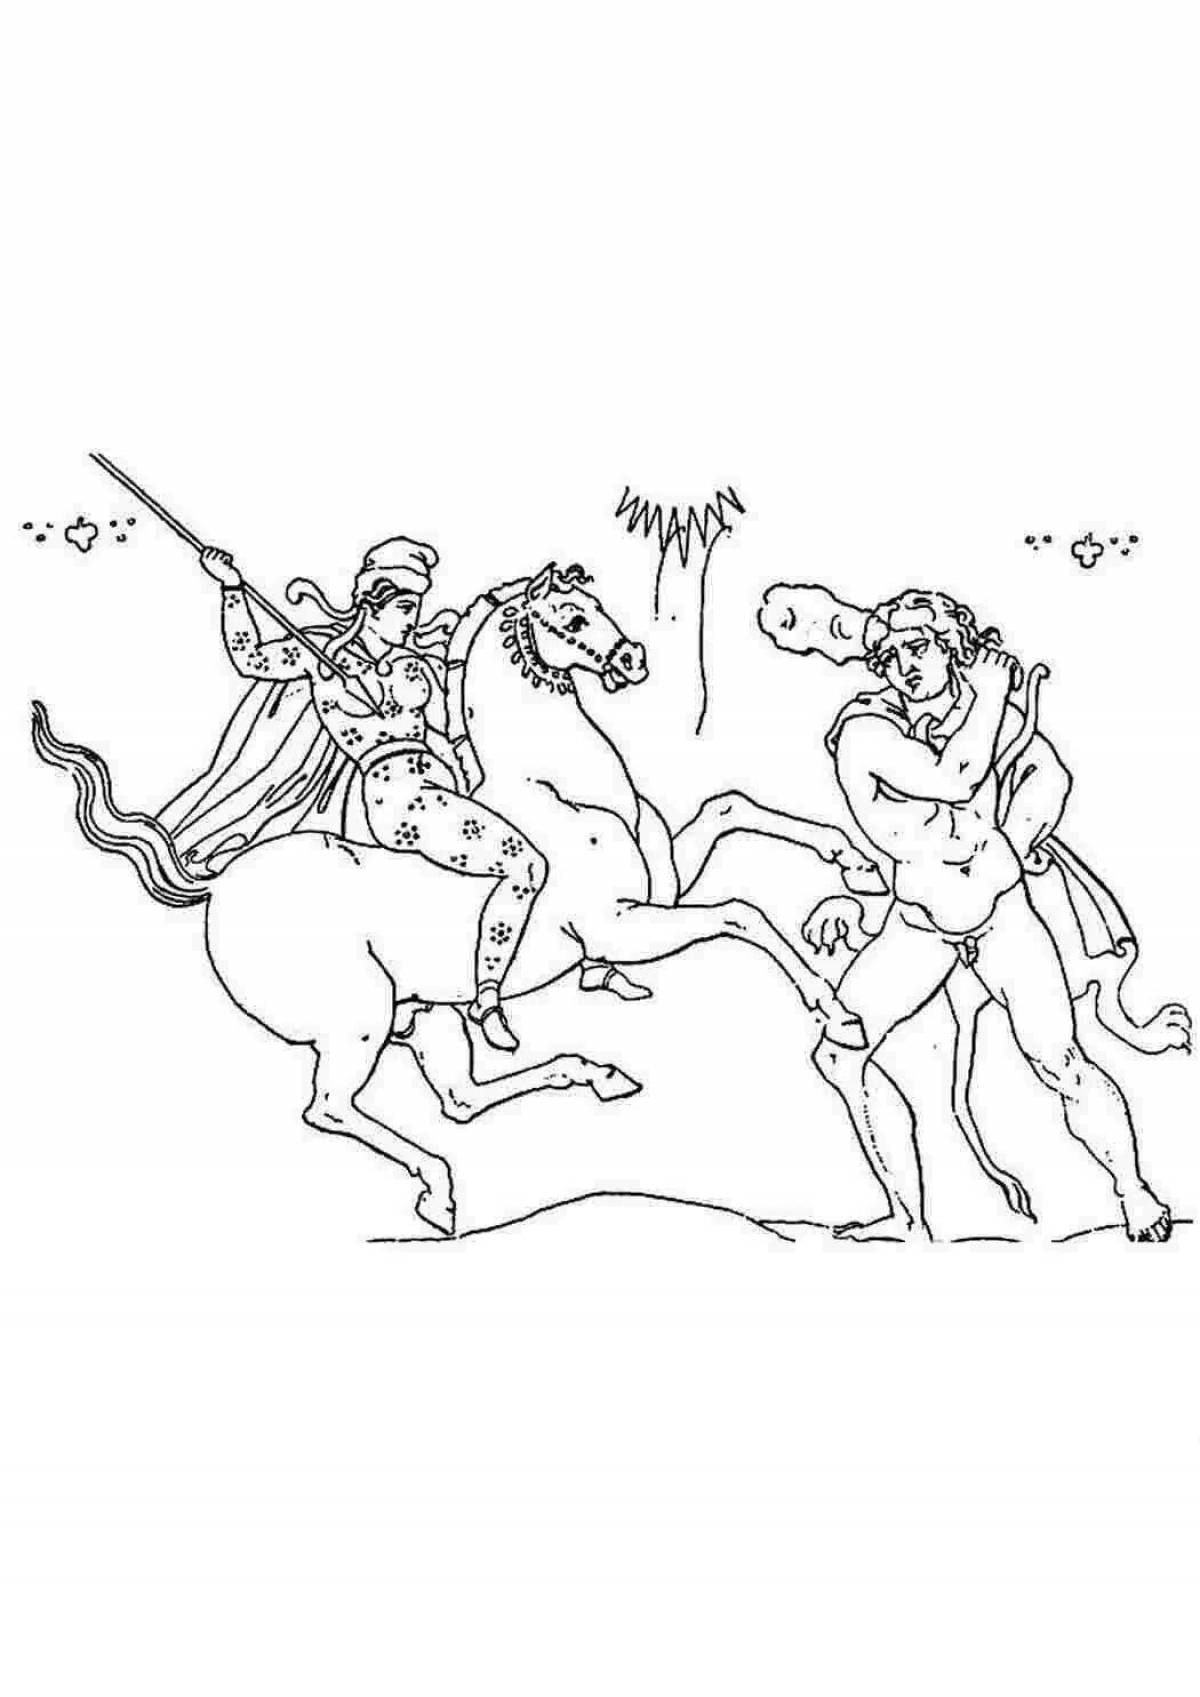 Dazzling Hercules coloring page